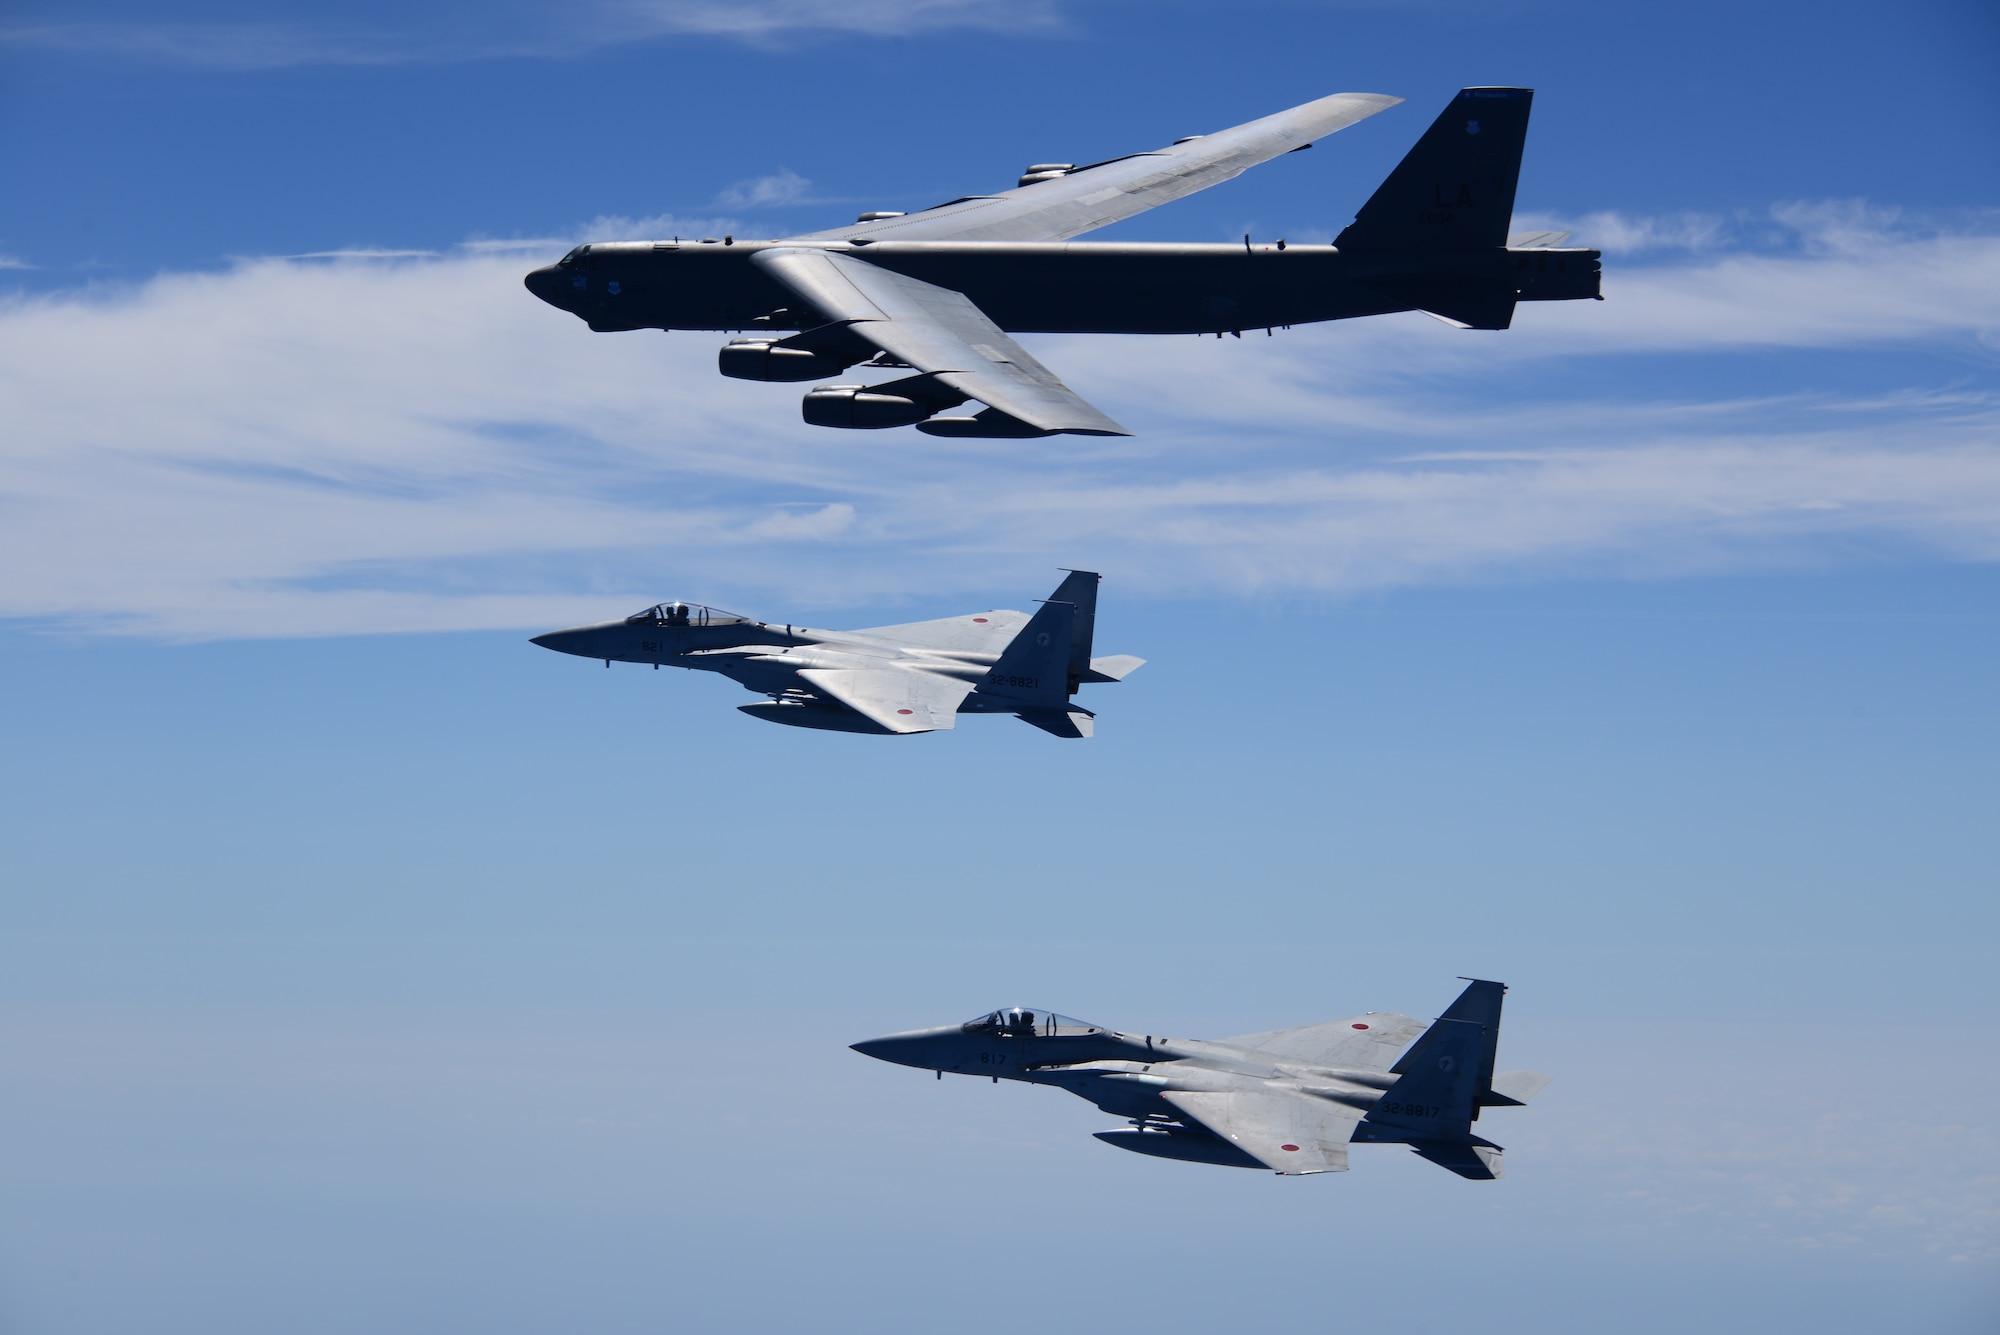 One U.S. Air Force B-52H Stratofortress bombers and two Koku Jieitai (Japan Air Self-Defense Force) F-15 fighters execute a routine bilateral training mission in the vicinity of Japan, July 26, 2018. This mission was flown in support of U.S. Indo-Pacific Command’s Continuous Bomber Presence (CBP) operations, which are a key component to improving combined and joint service interoperability. Bilateral training missions such as this allow the two countries to improve upon combined capabilities, tactical skills, and relationships. (Courtesy Photo)